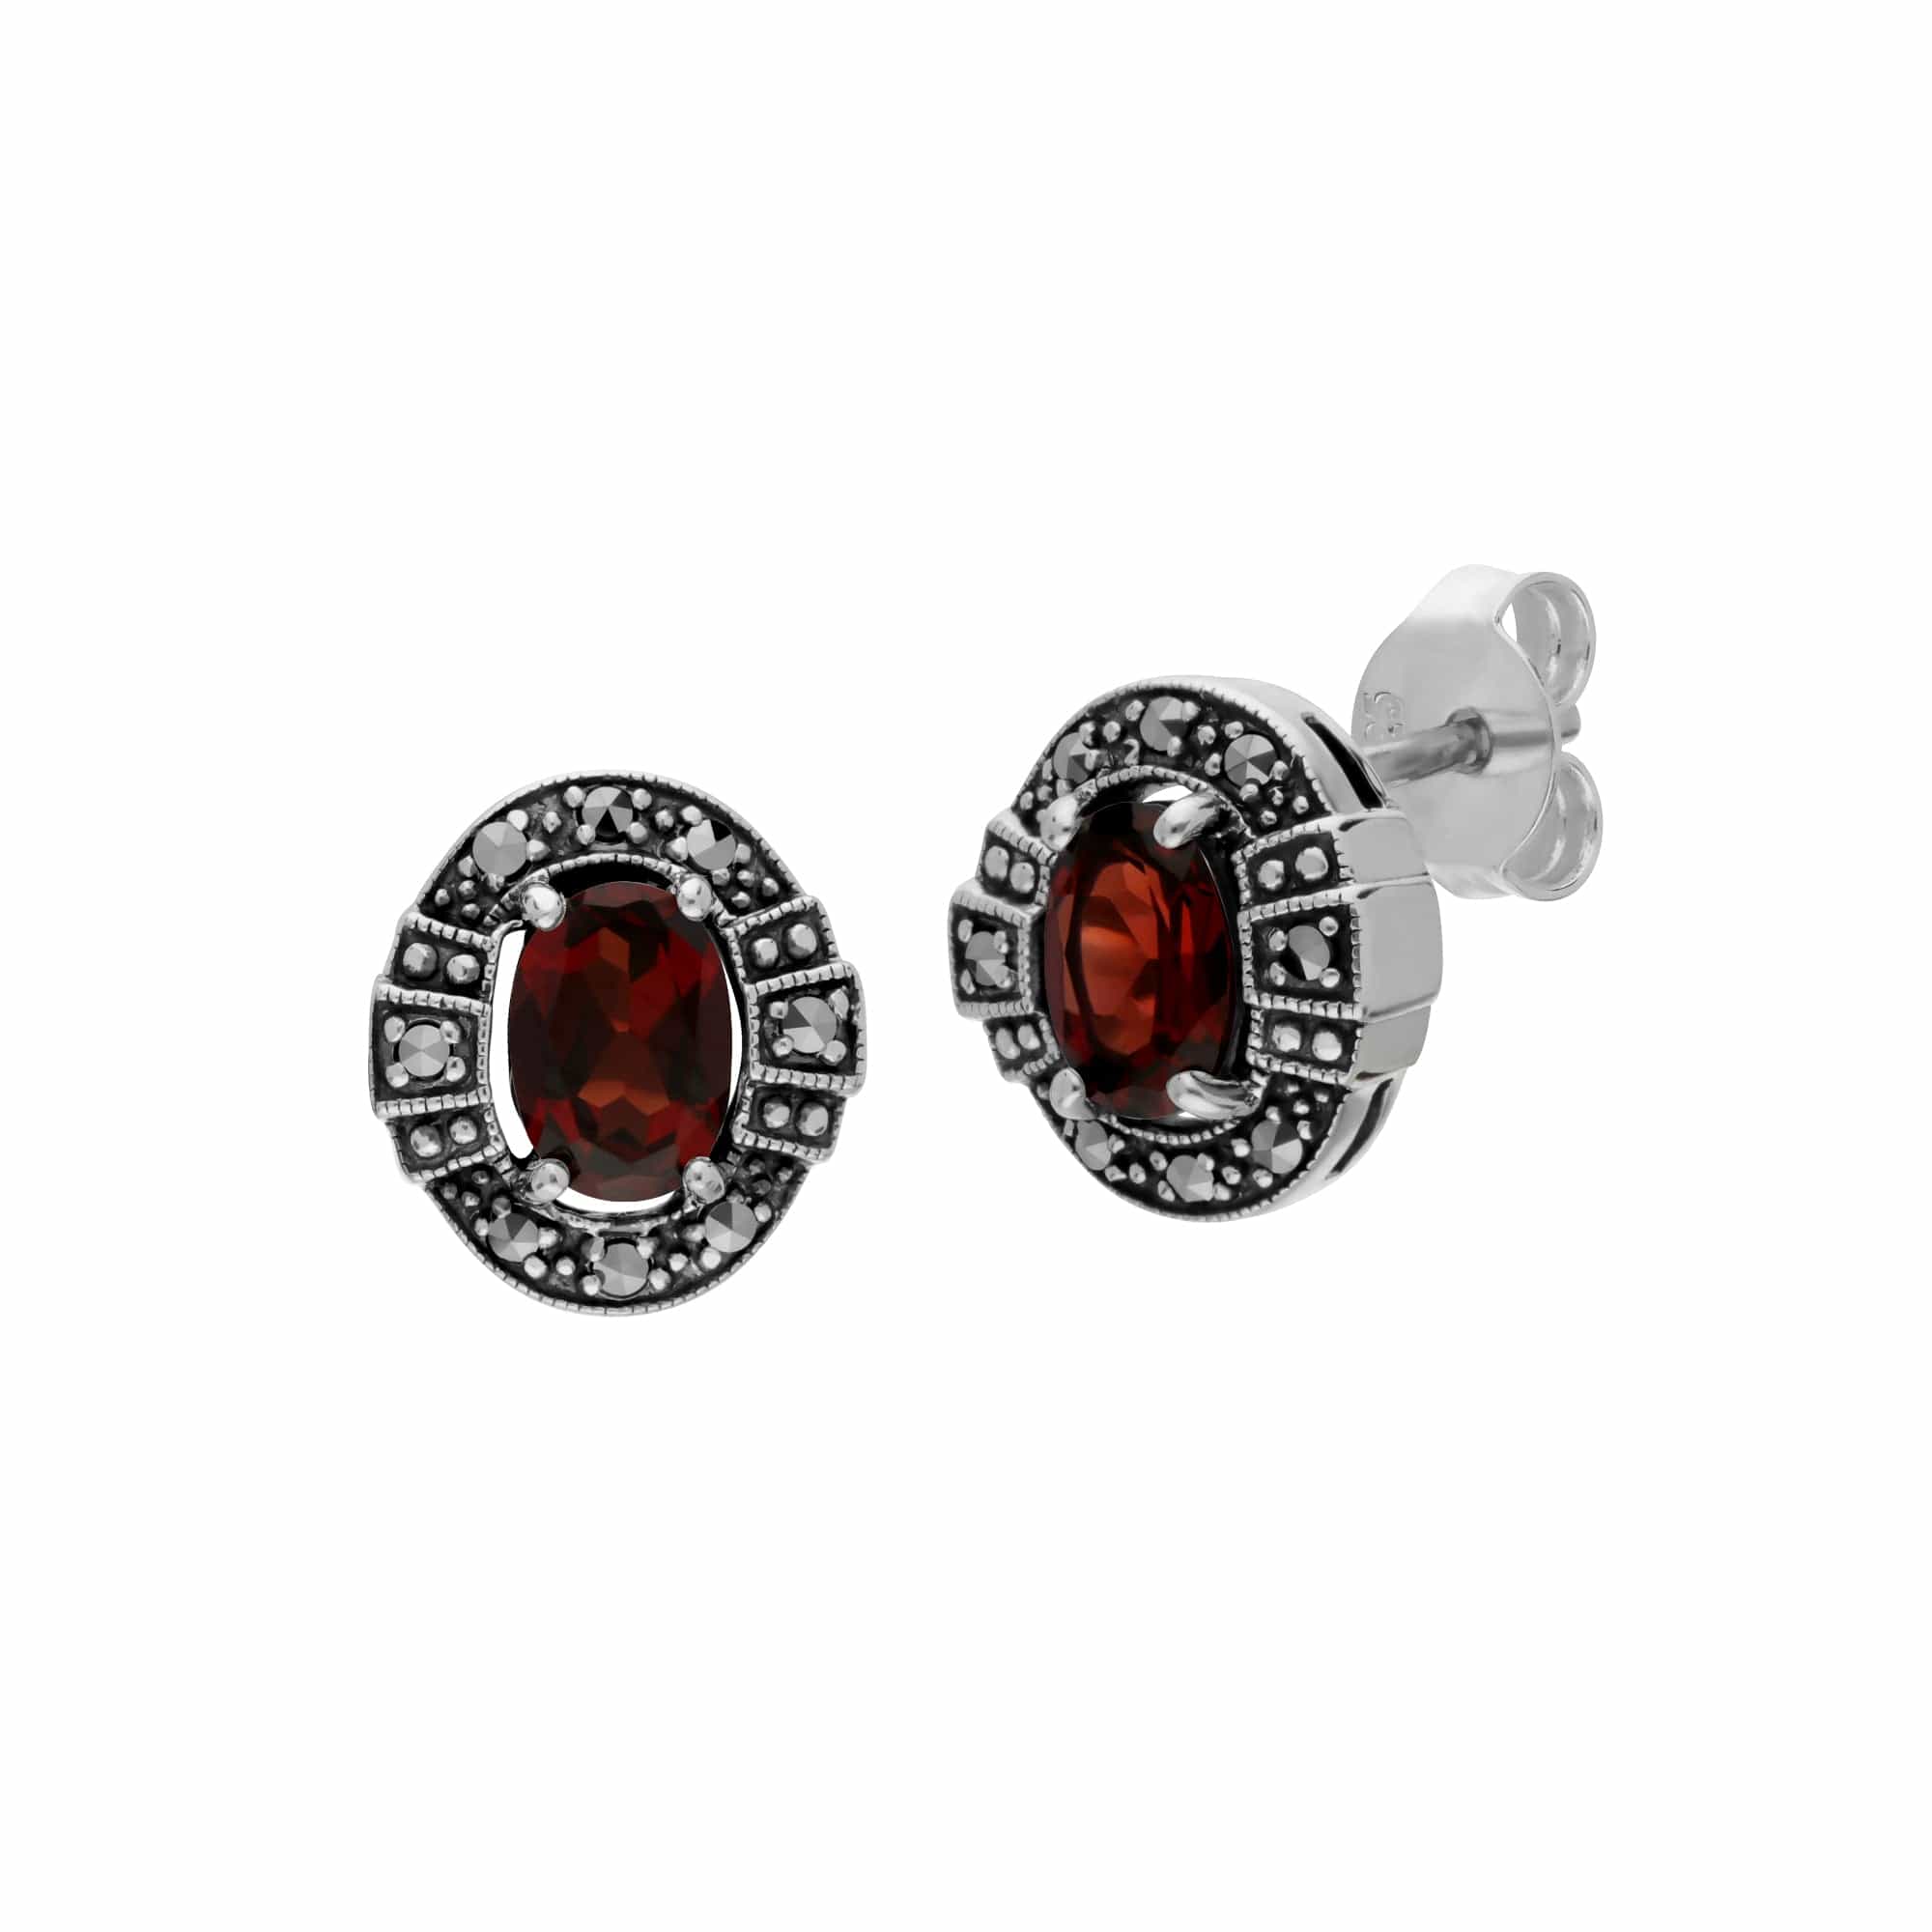 214E873003925-214R605703925 Art Deco Style Oval Garnet and Marcasite Cluster Stud Earrings & Ring Set in 925 Sterling Silver 2